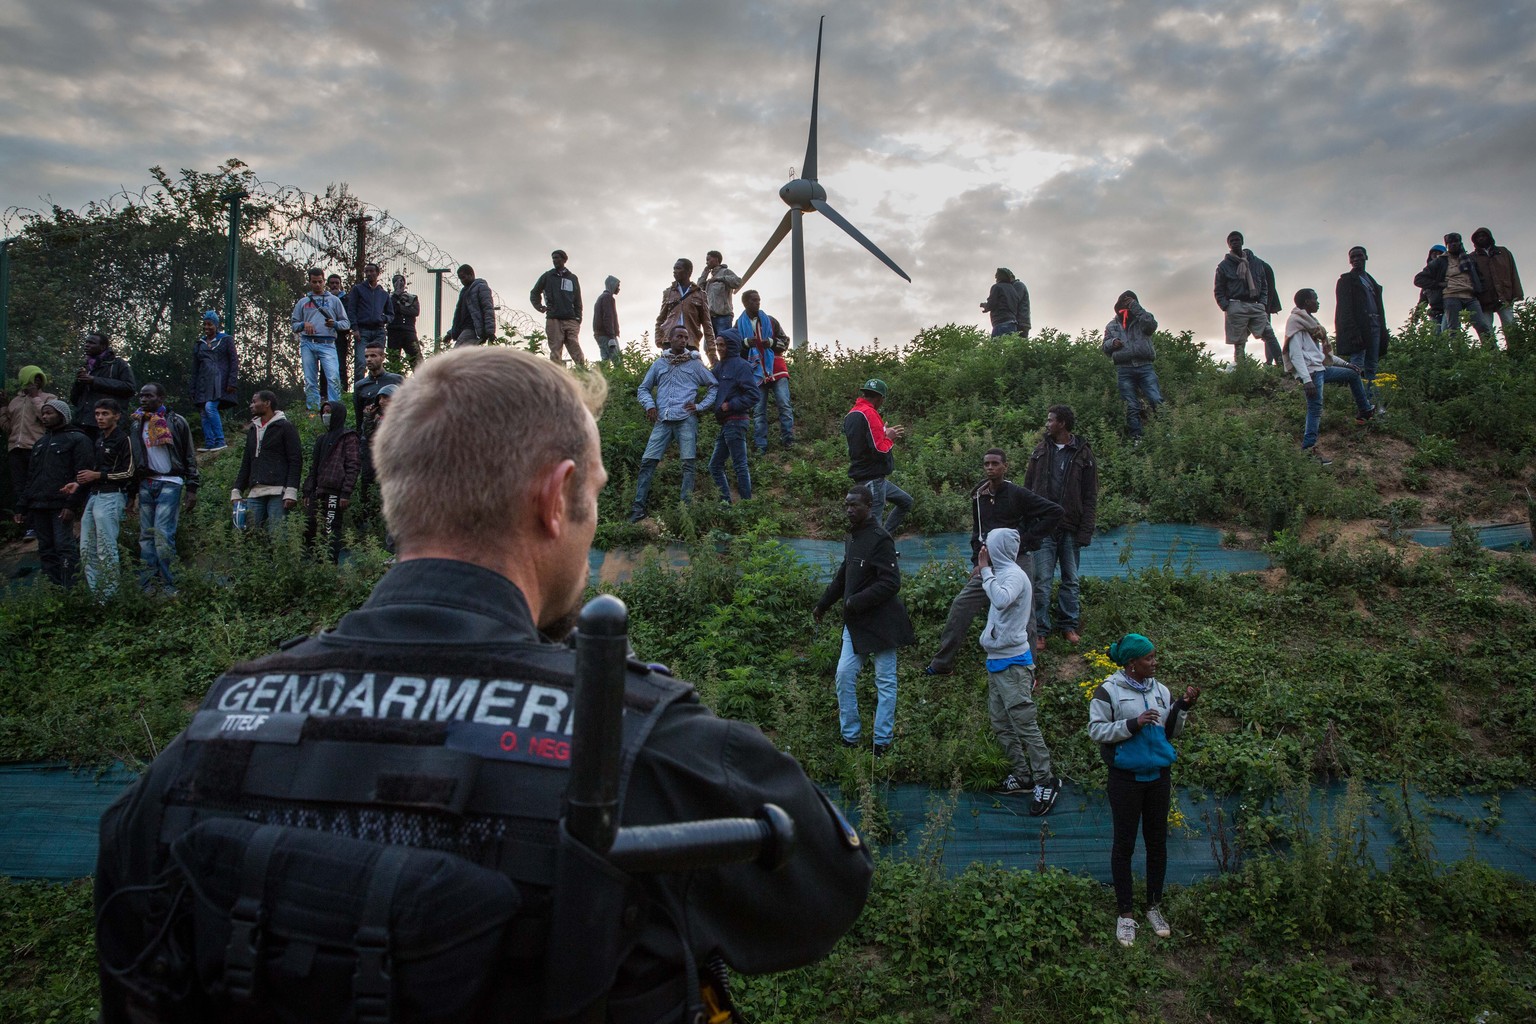 CALAIS, FRANCE - JULY 30: Gendarmerie attempt to prevent people from entering the Eurotunnel terminal in Coquelles on July 30, 2015 in Calais, France. Hundreds of migrants are continuing to attempt to ...